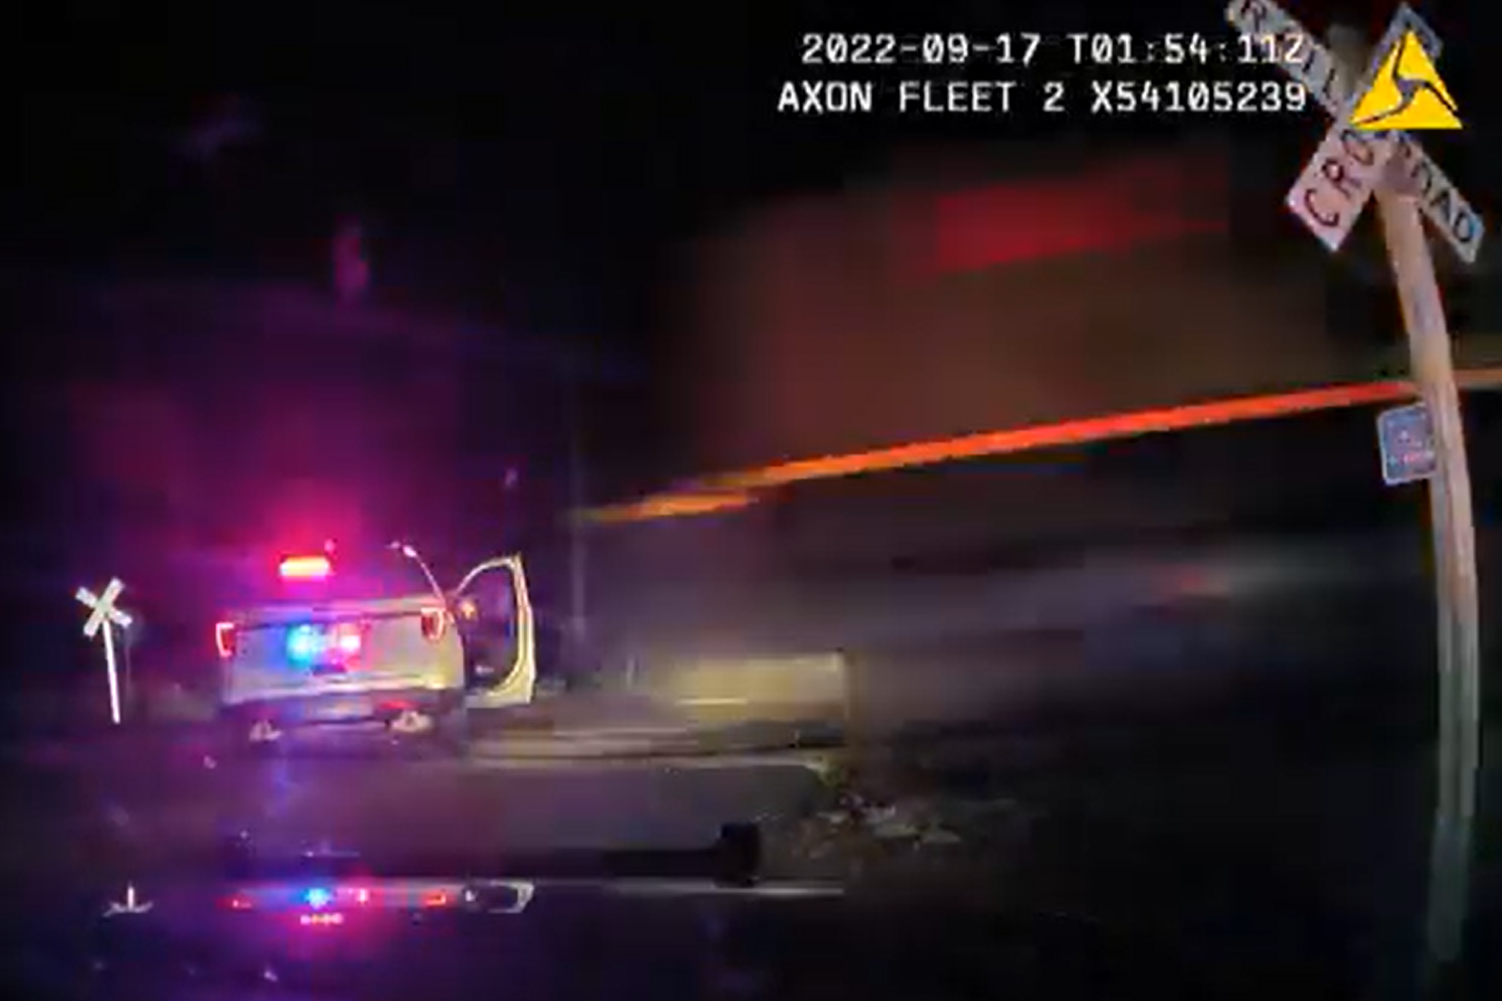 Police body camera video from Saturday, Sept. 17, 2022, shows police illegally parked on train tracks in Weld County.